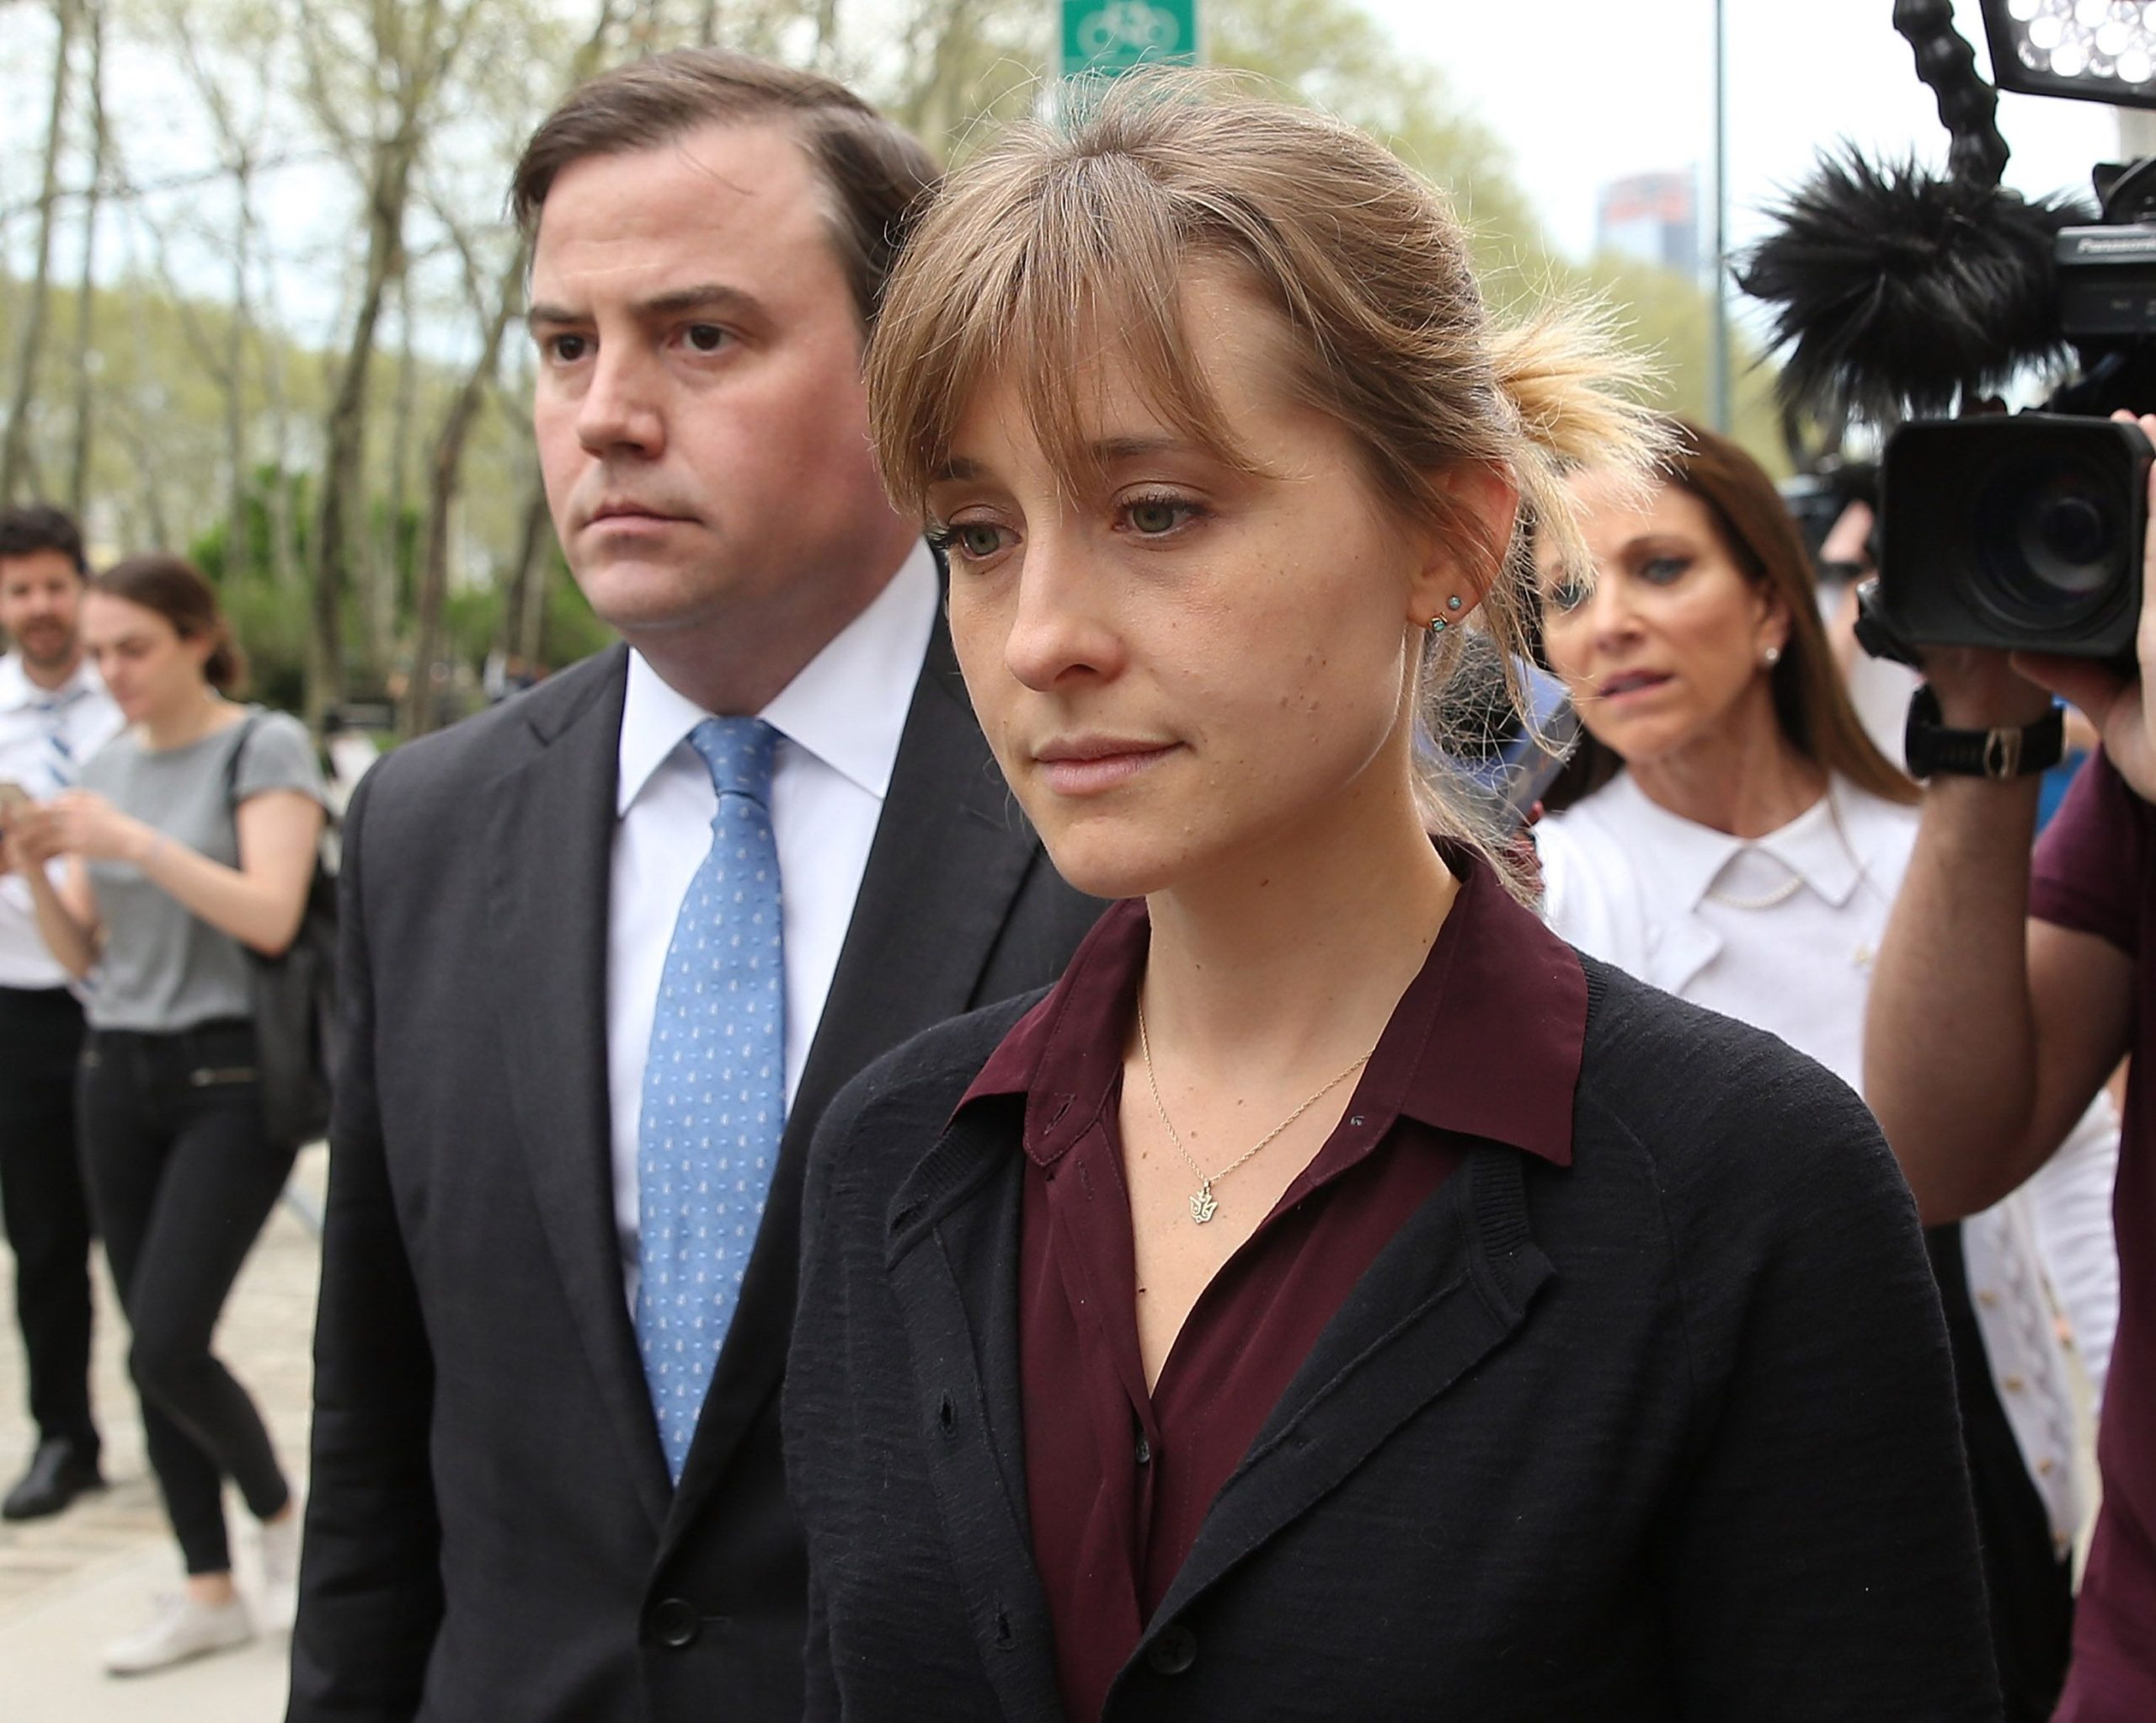 ‘smallville Actress Allison Mack Sentenced To 3 Years In Prison For Nxivm Sex Trafficking